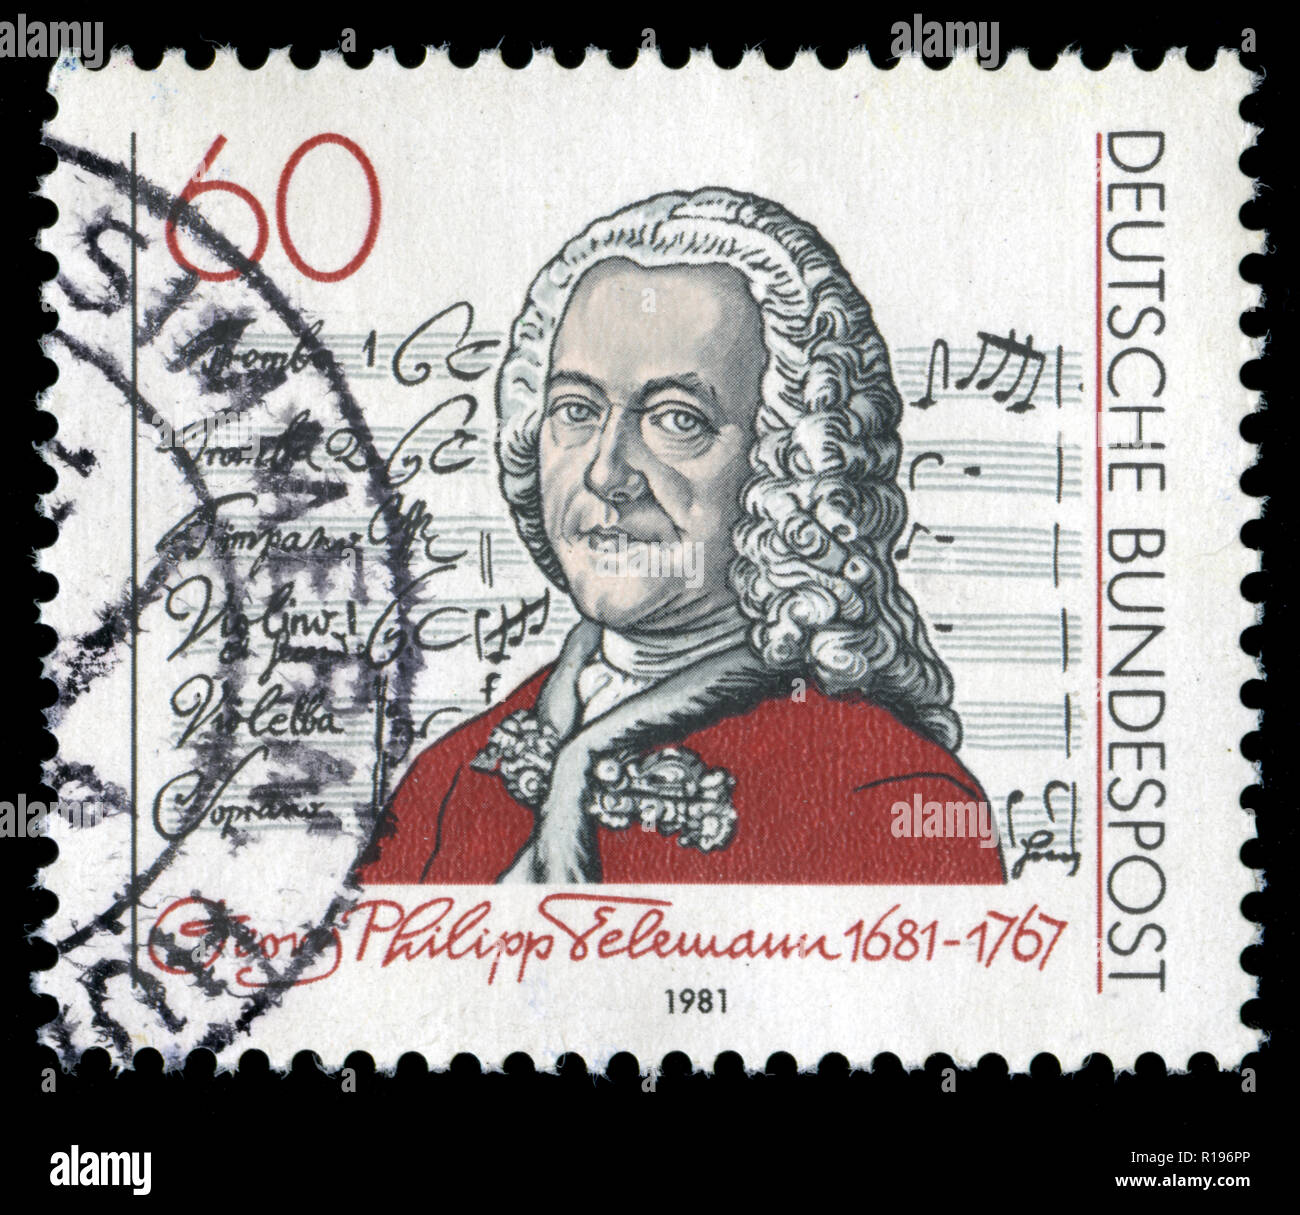 Postmarked stamp from the Federal Republic of Germany in the 300th birthday of Georg Philipp Telemann series issued in 1961 Stock Photo